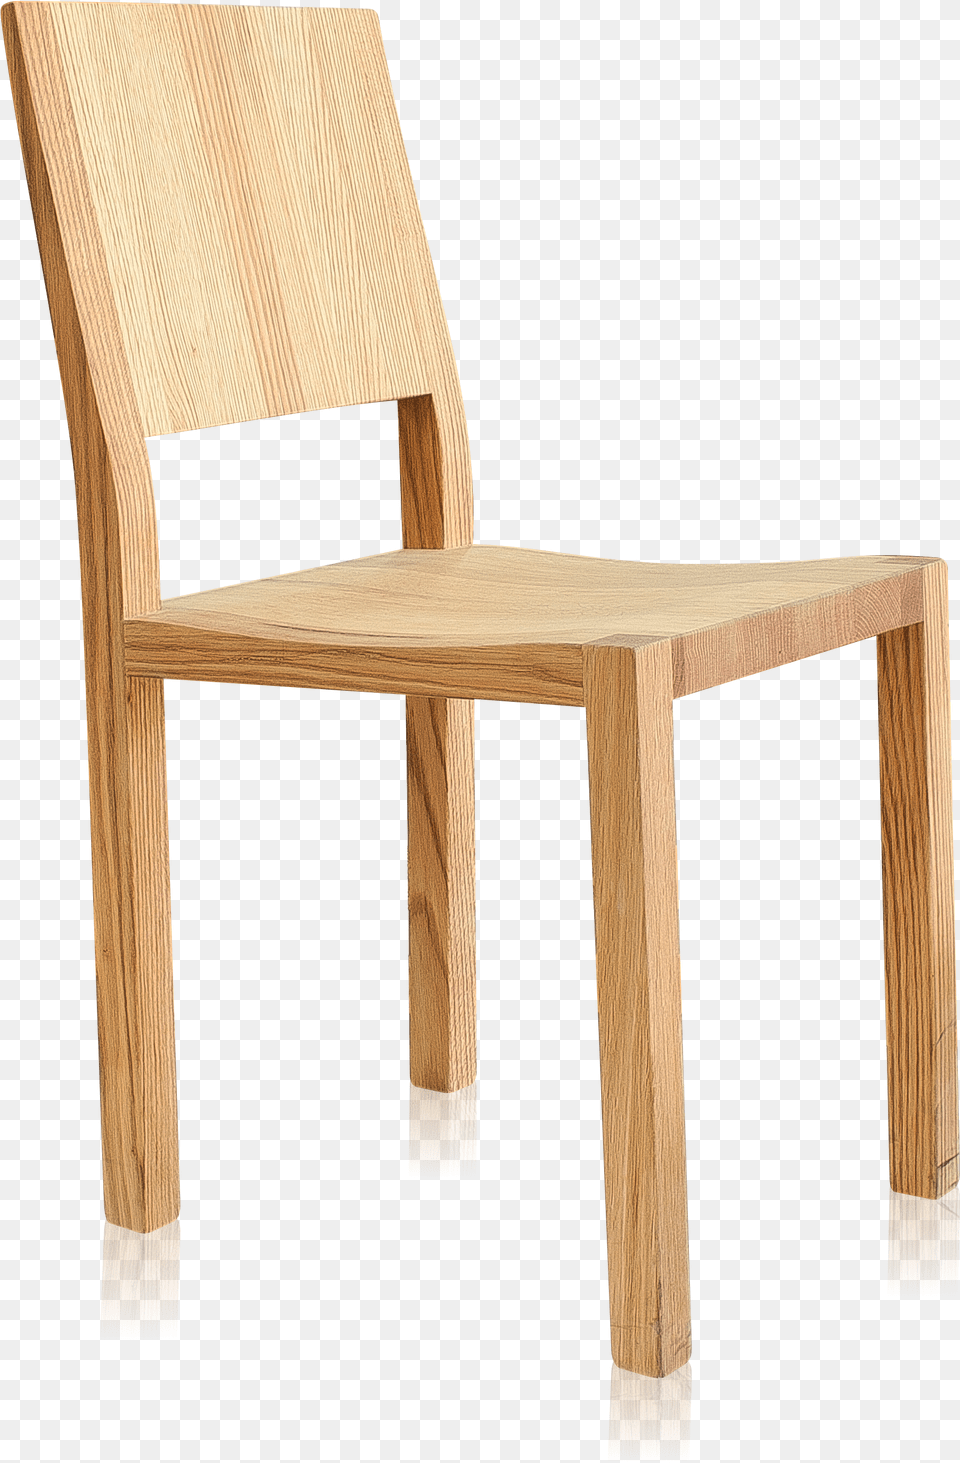 Chair, Furniture, Wood, Plywood Png